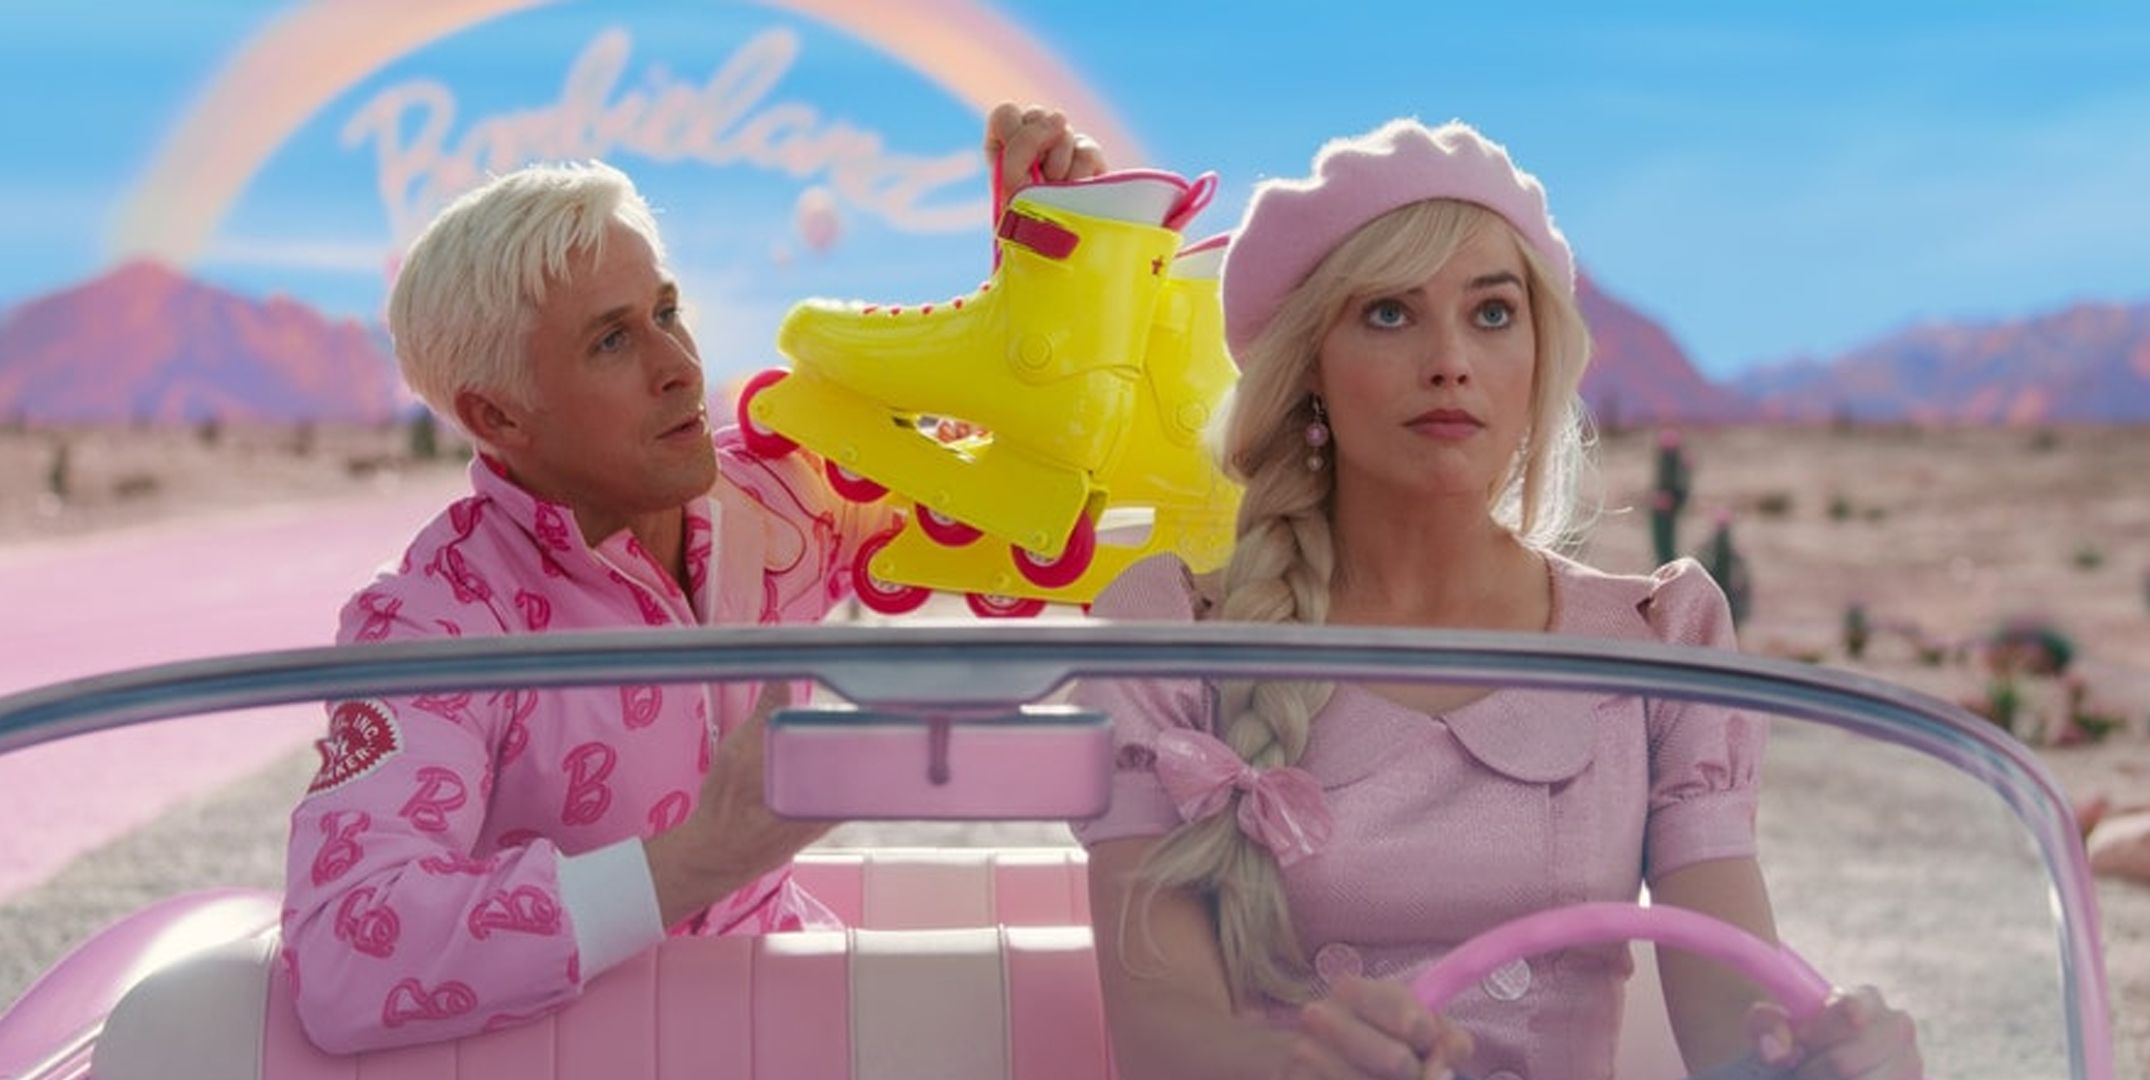 The 'Barbie the Movie' Dolls Are Transporting Us to Barbie Land